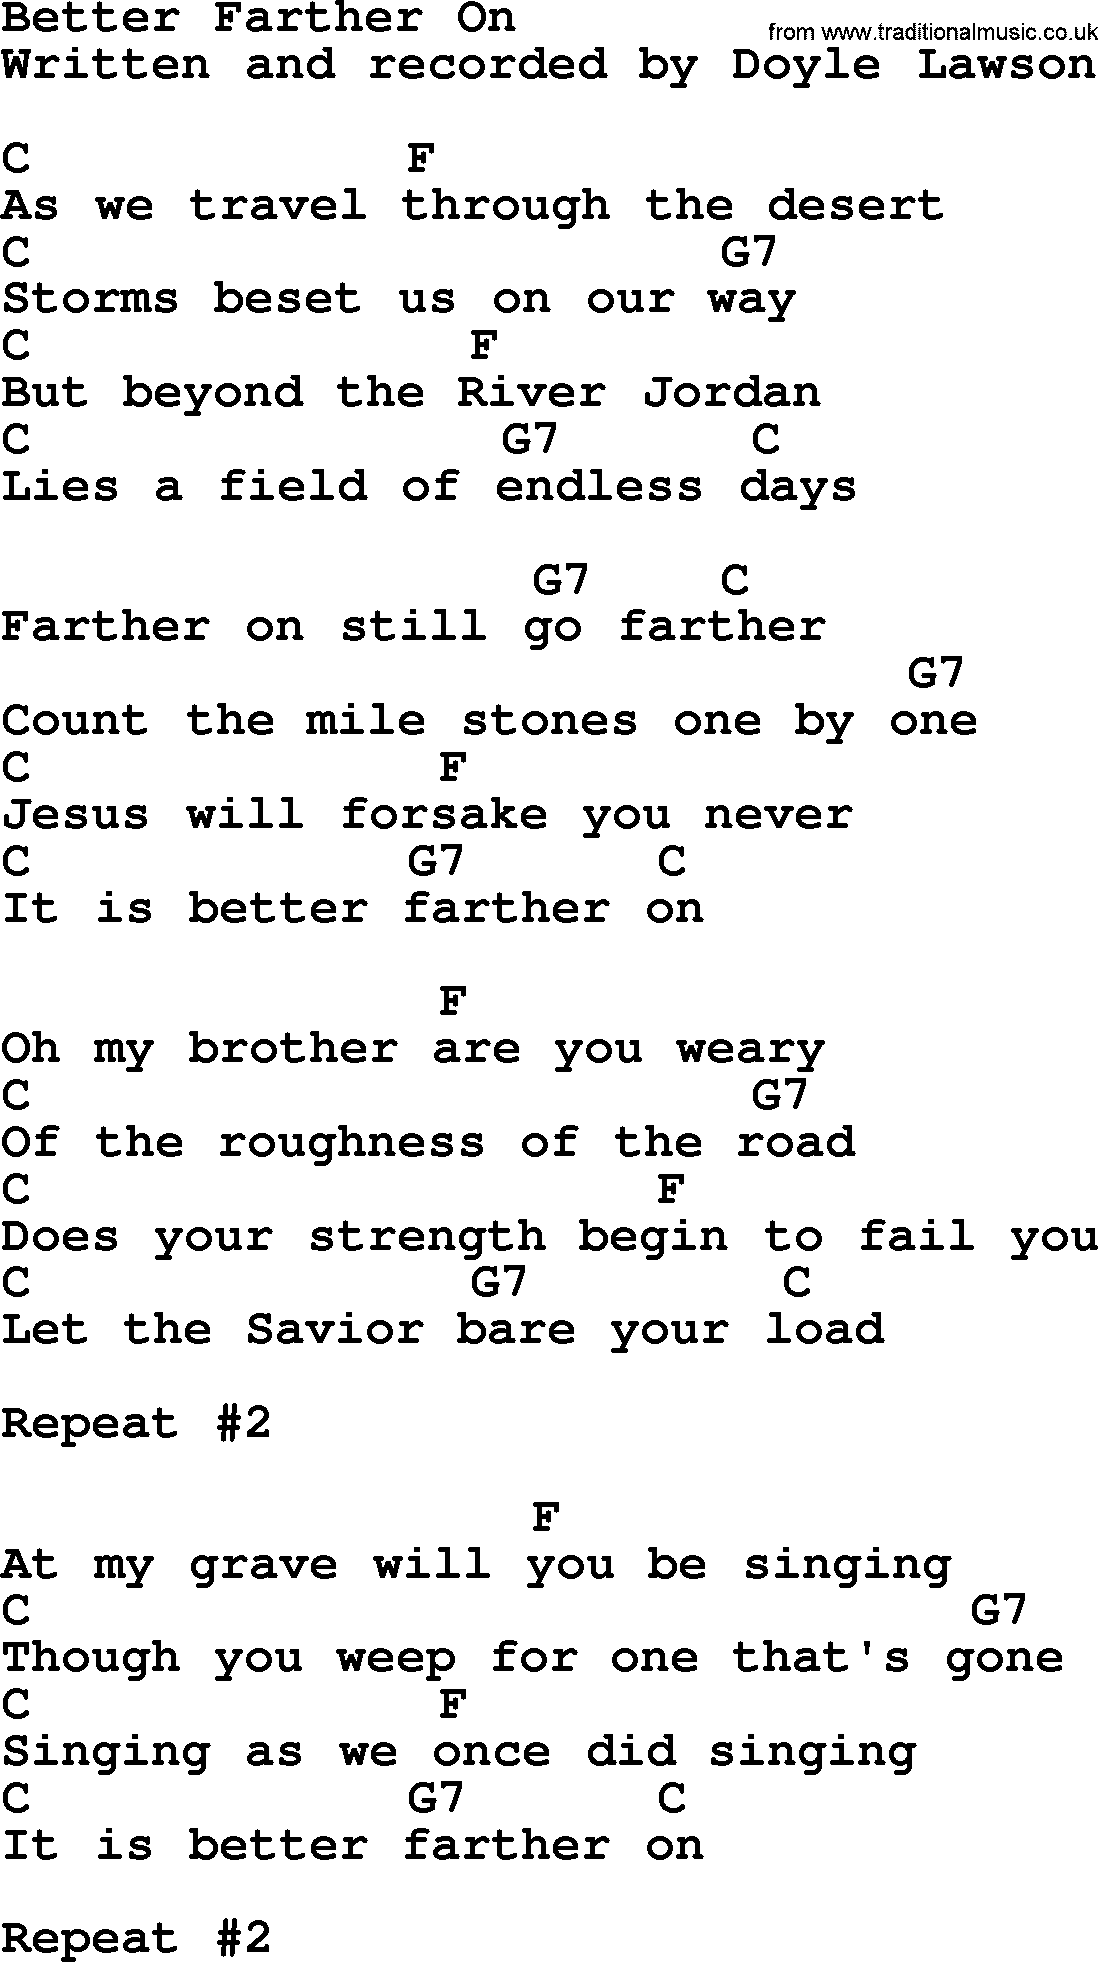 Bluegrass song: Better Farther On, lyrics and chords